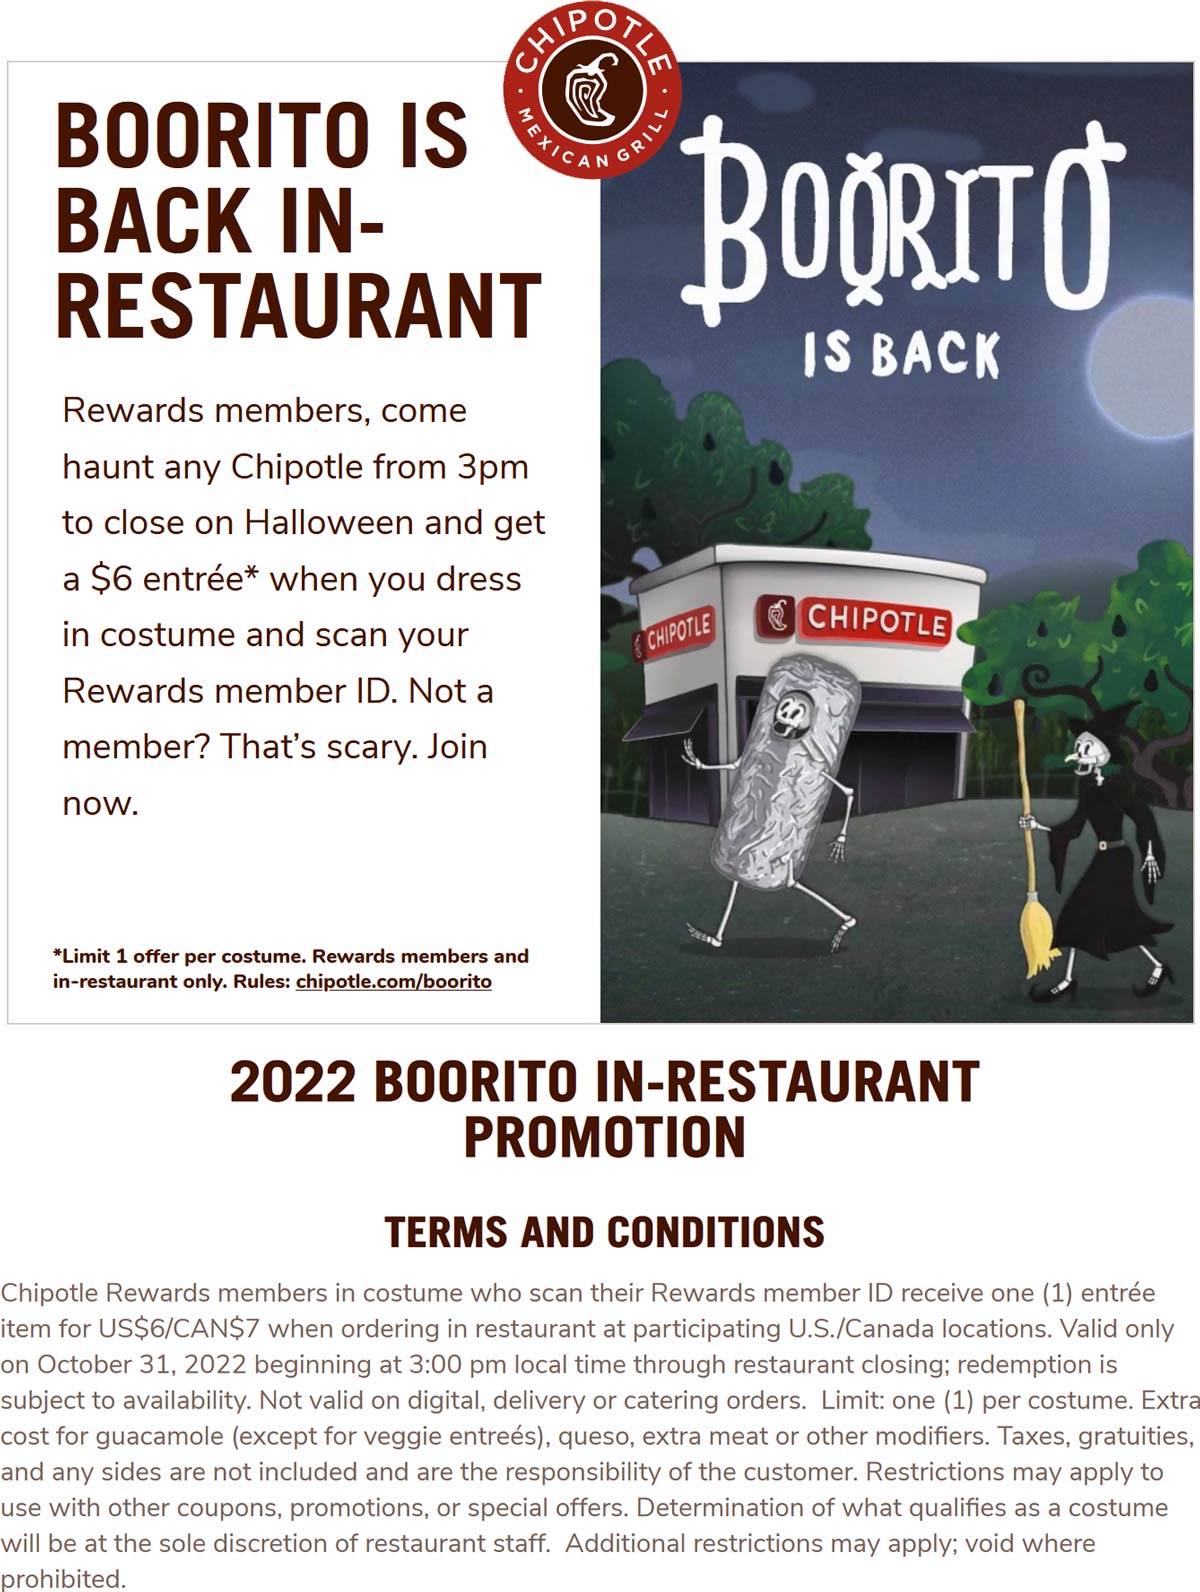 Chipotle restaurants Coupon  Discounted entree in costume on Halloween at Chipotle #chipotle 